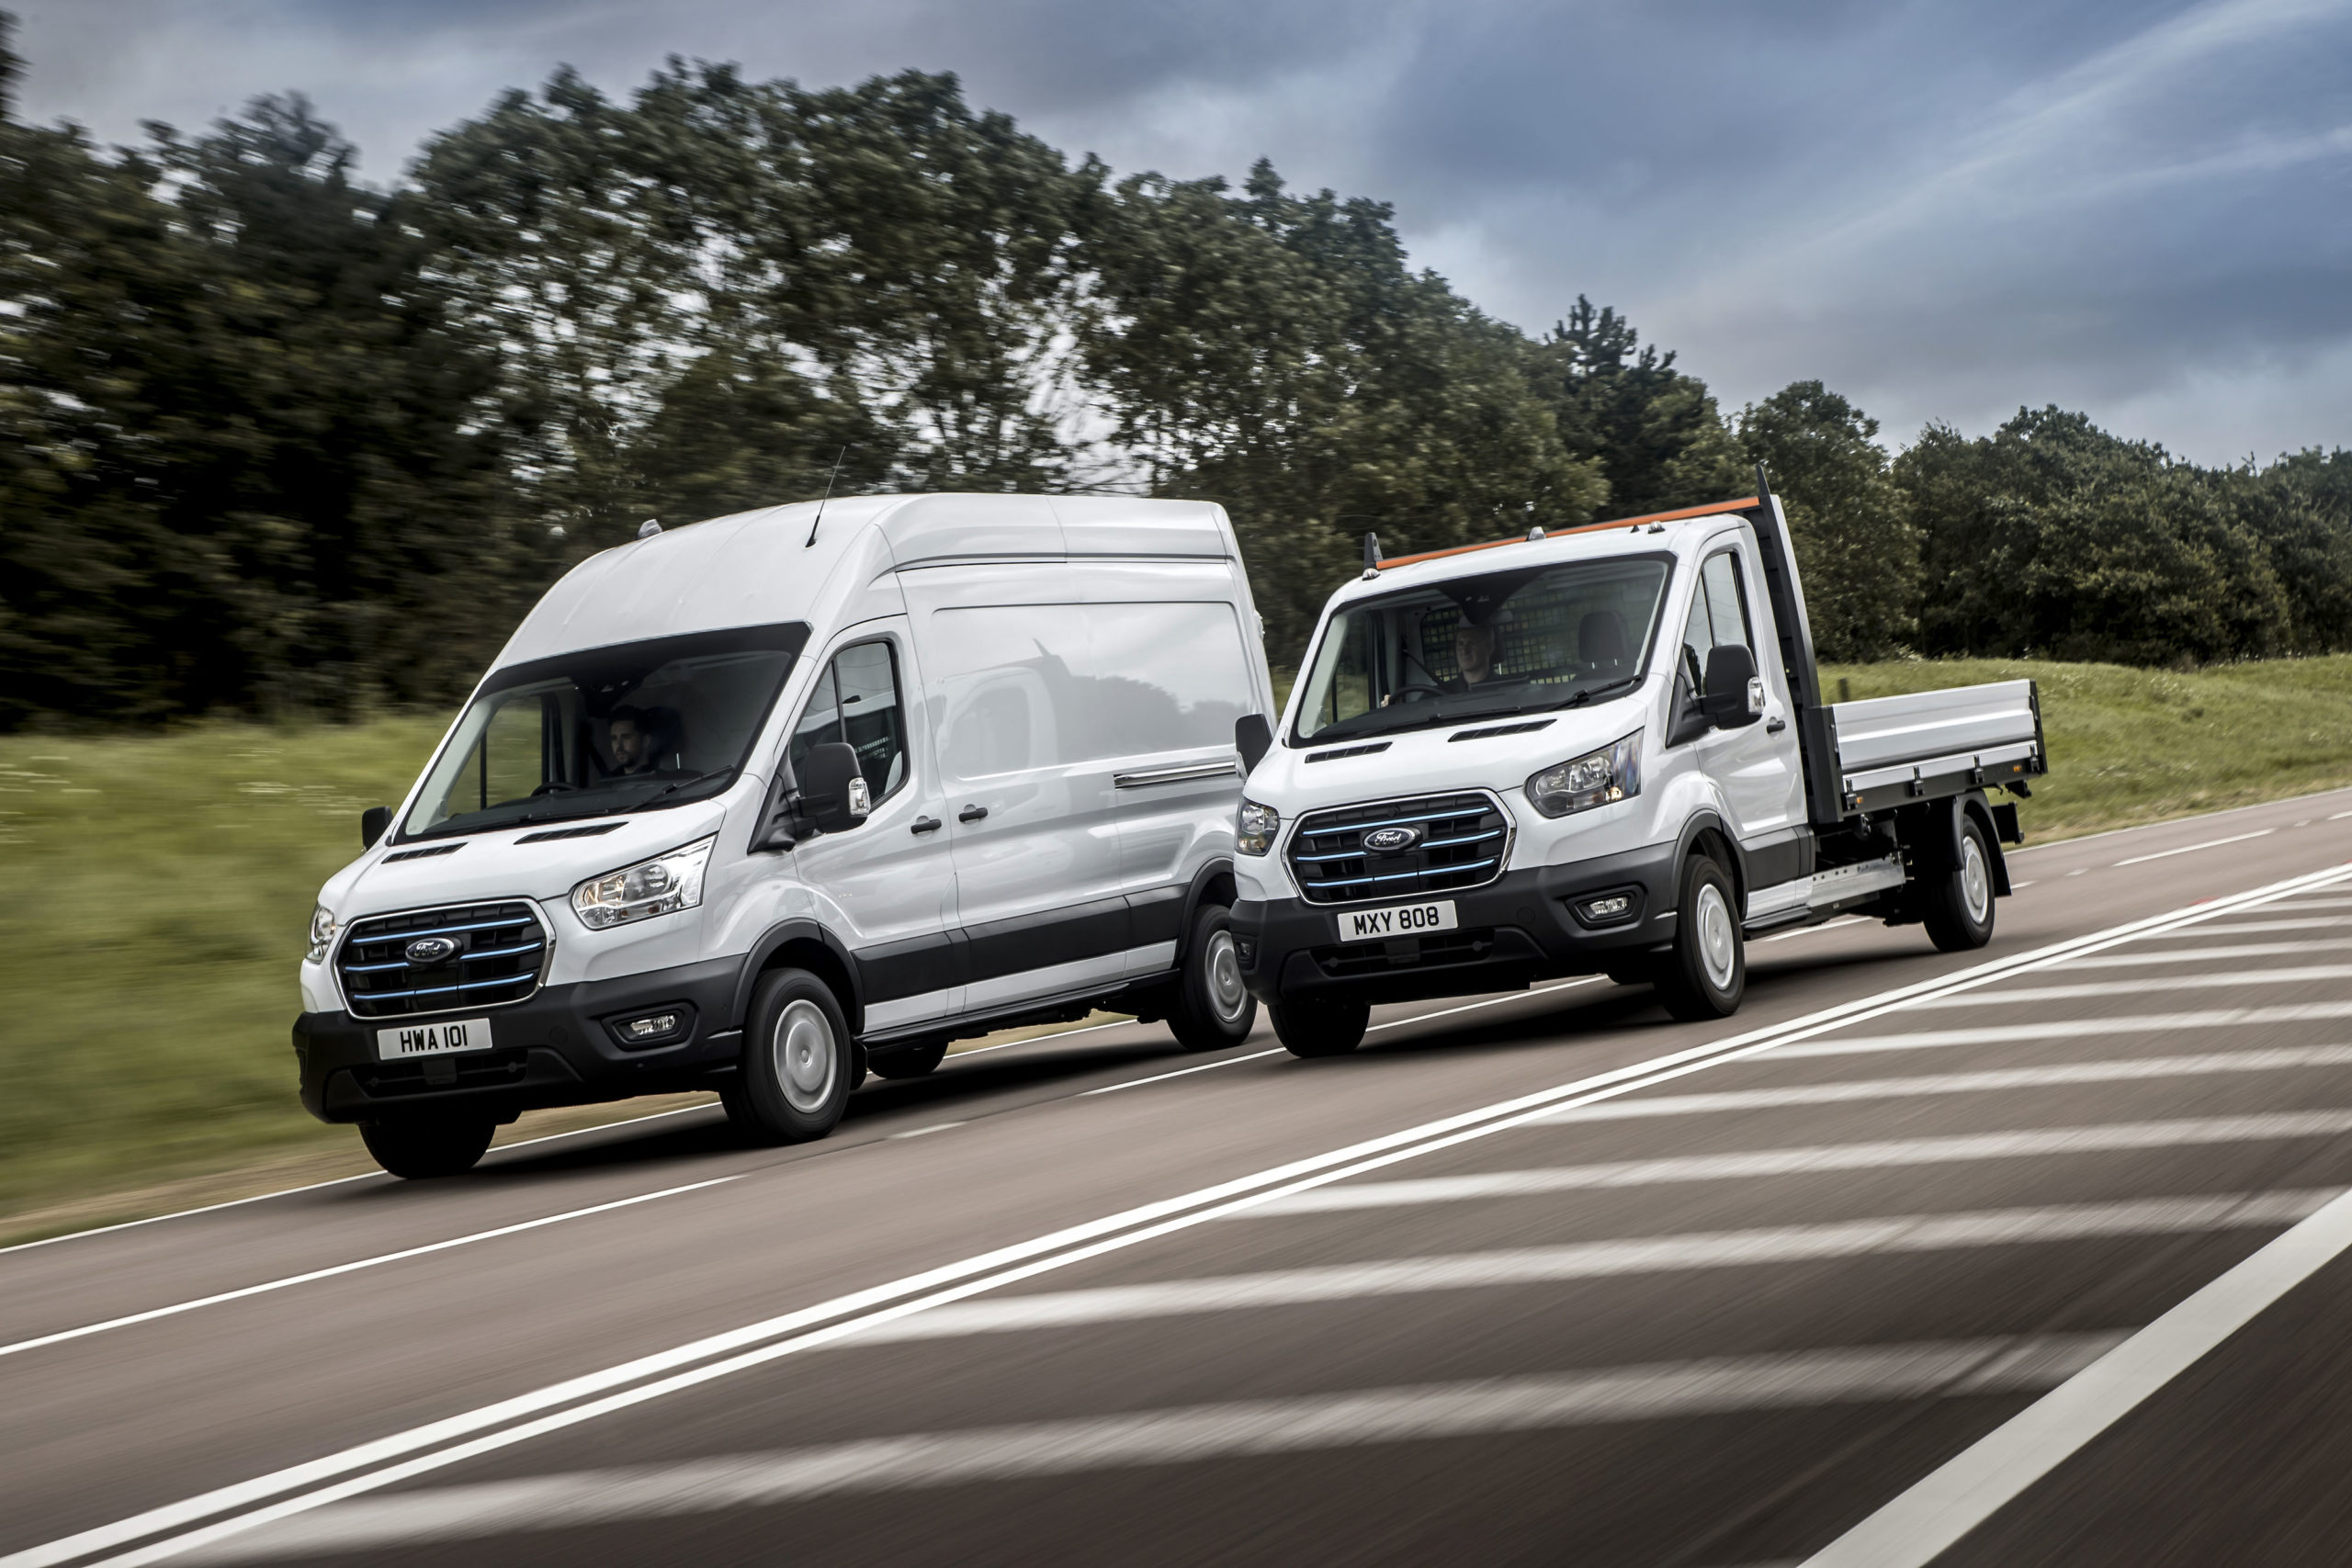 E-vans over 3,5 tons to get tachograph exception in Belgium?